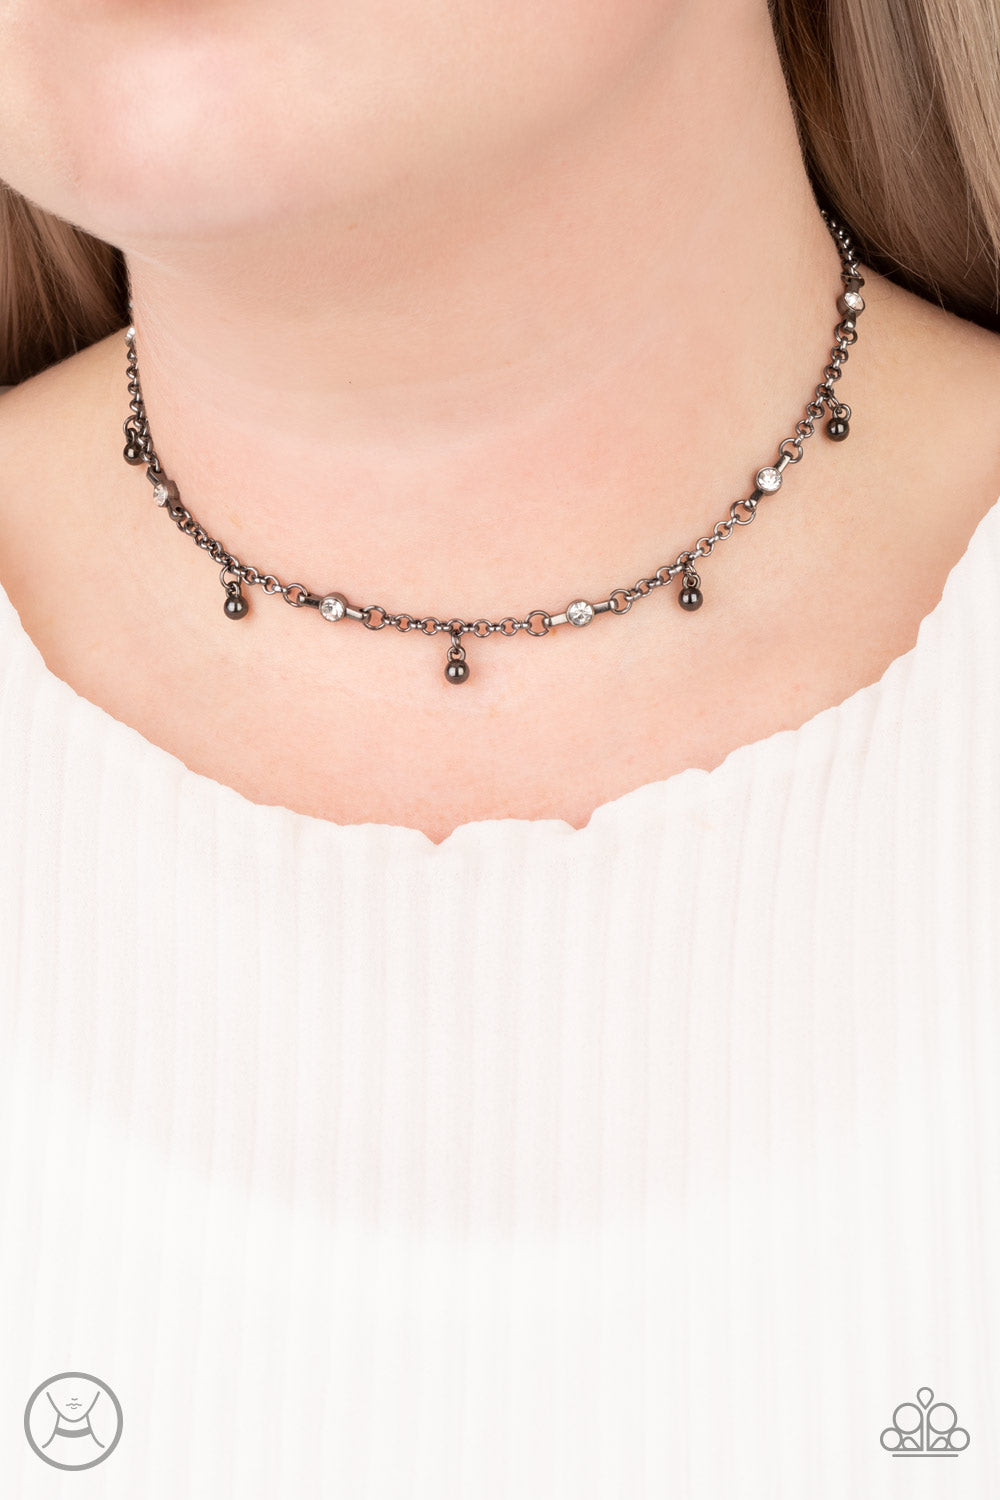 Featuring sleek fittings, dainty white rhinestones link with sections of glistening gunmetal chain around the neck. Shiny gunmetal beads dangle from the chain for a flirtatious finish. Features an adjustable clasp closure.  Sold as one individual choker necklace. Includes one pair of matching earrings.